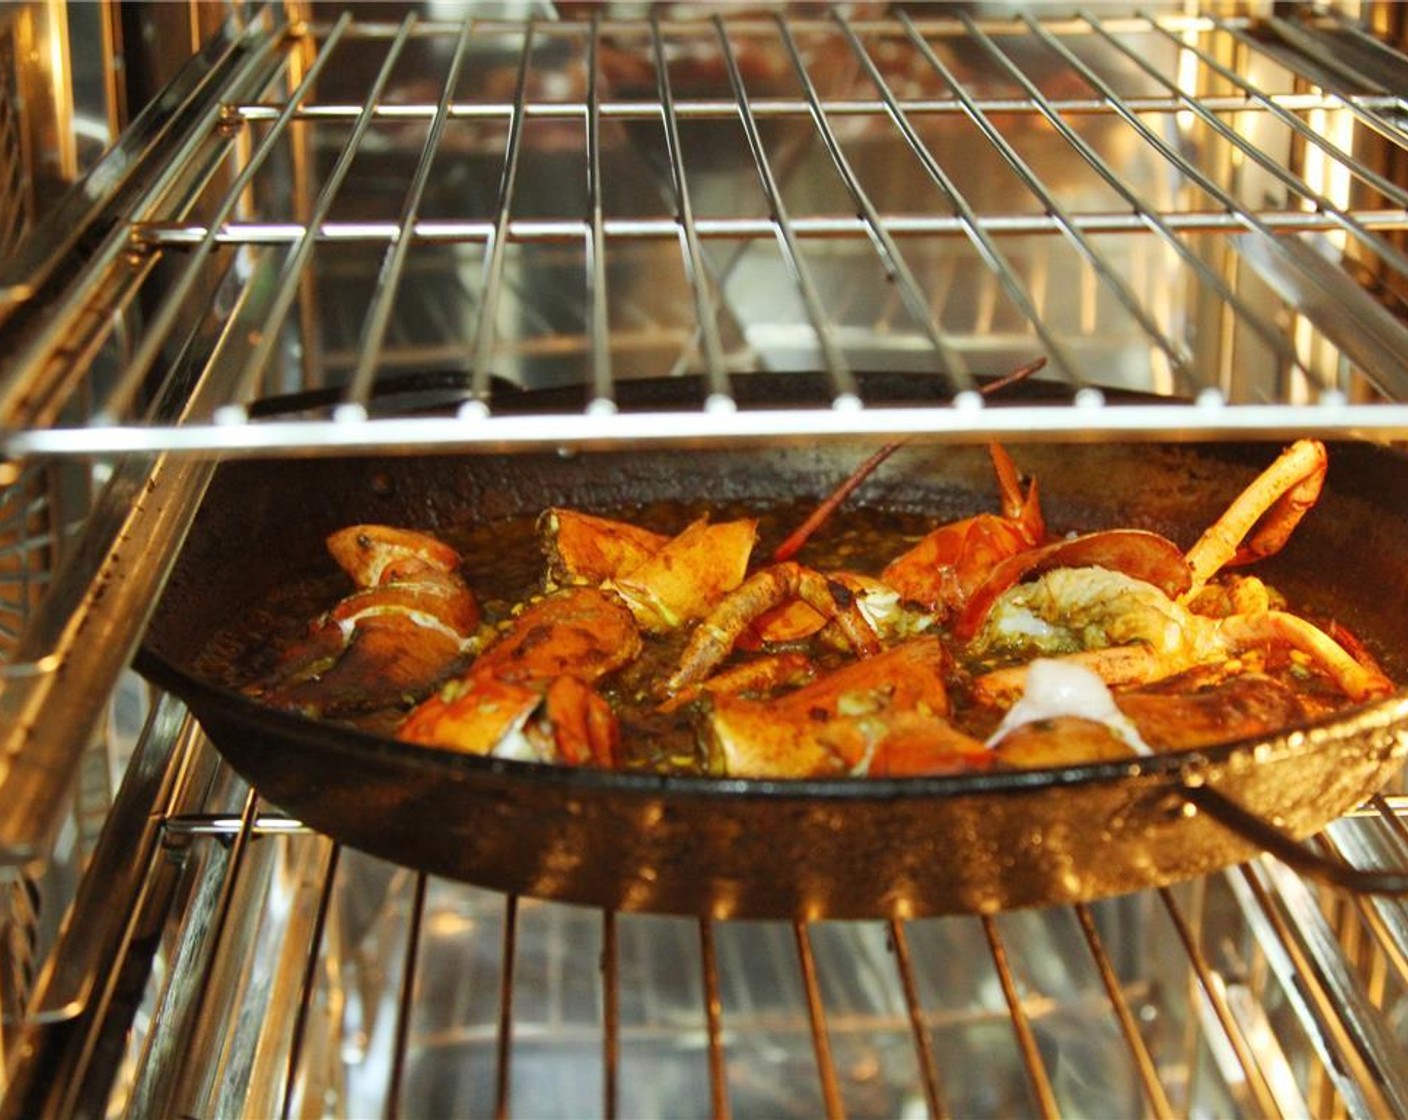 step 21 In order to dry the paella all the way, turn up the oven to the highest temperature and place in the oven for another 2 minutes.